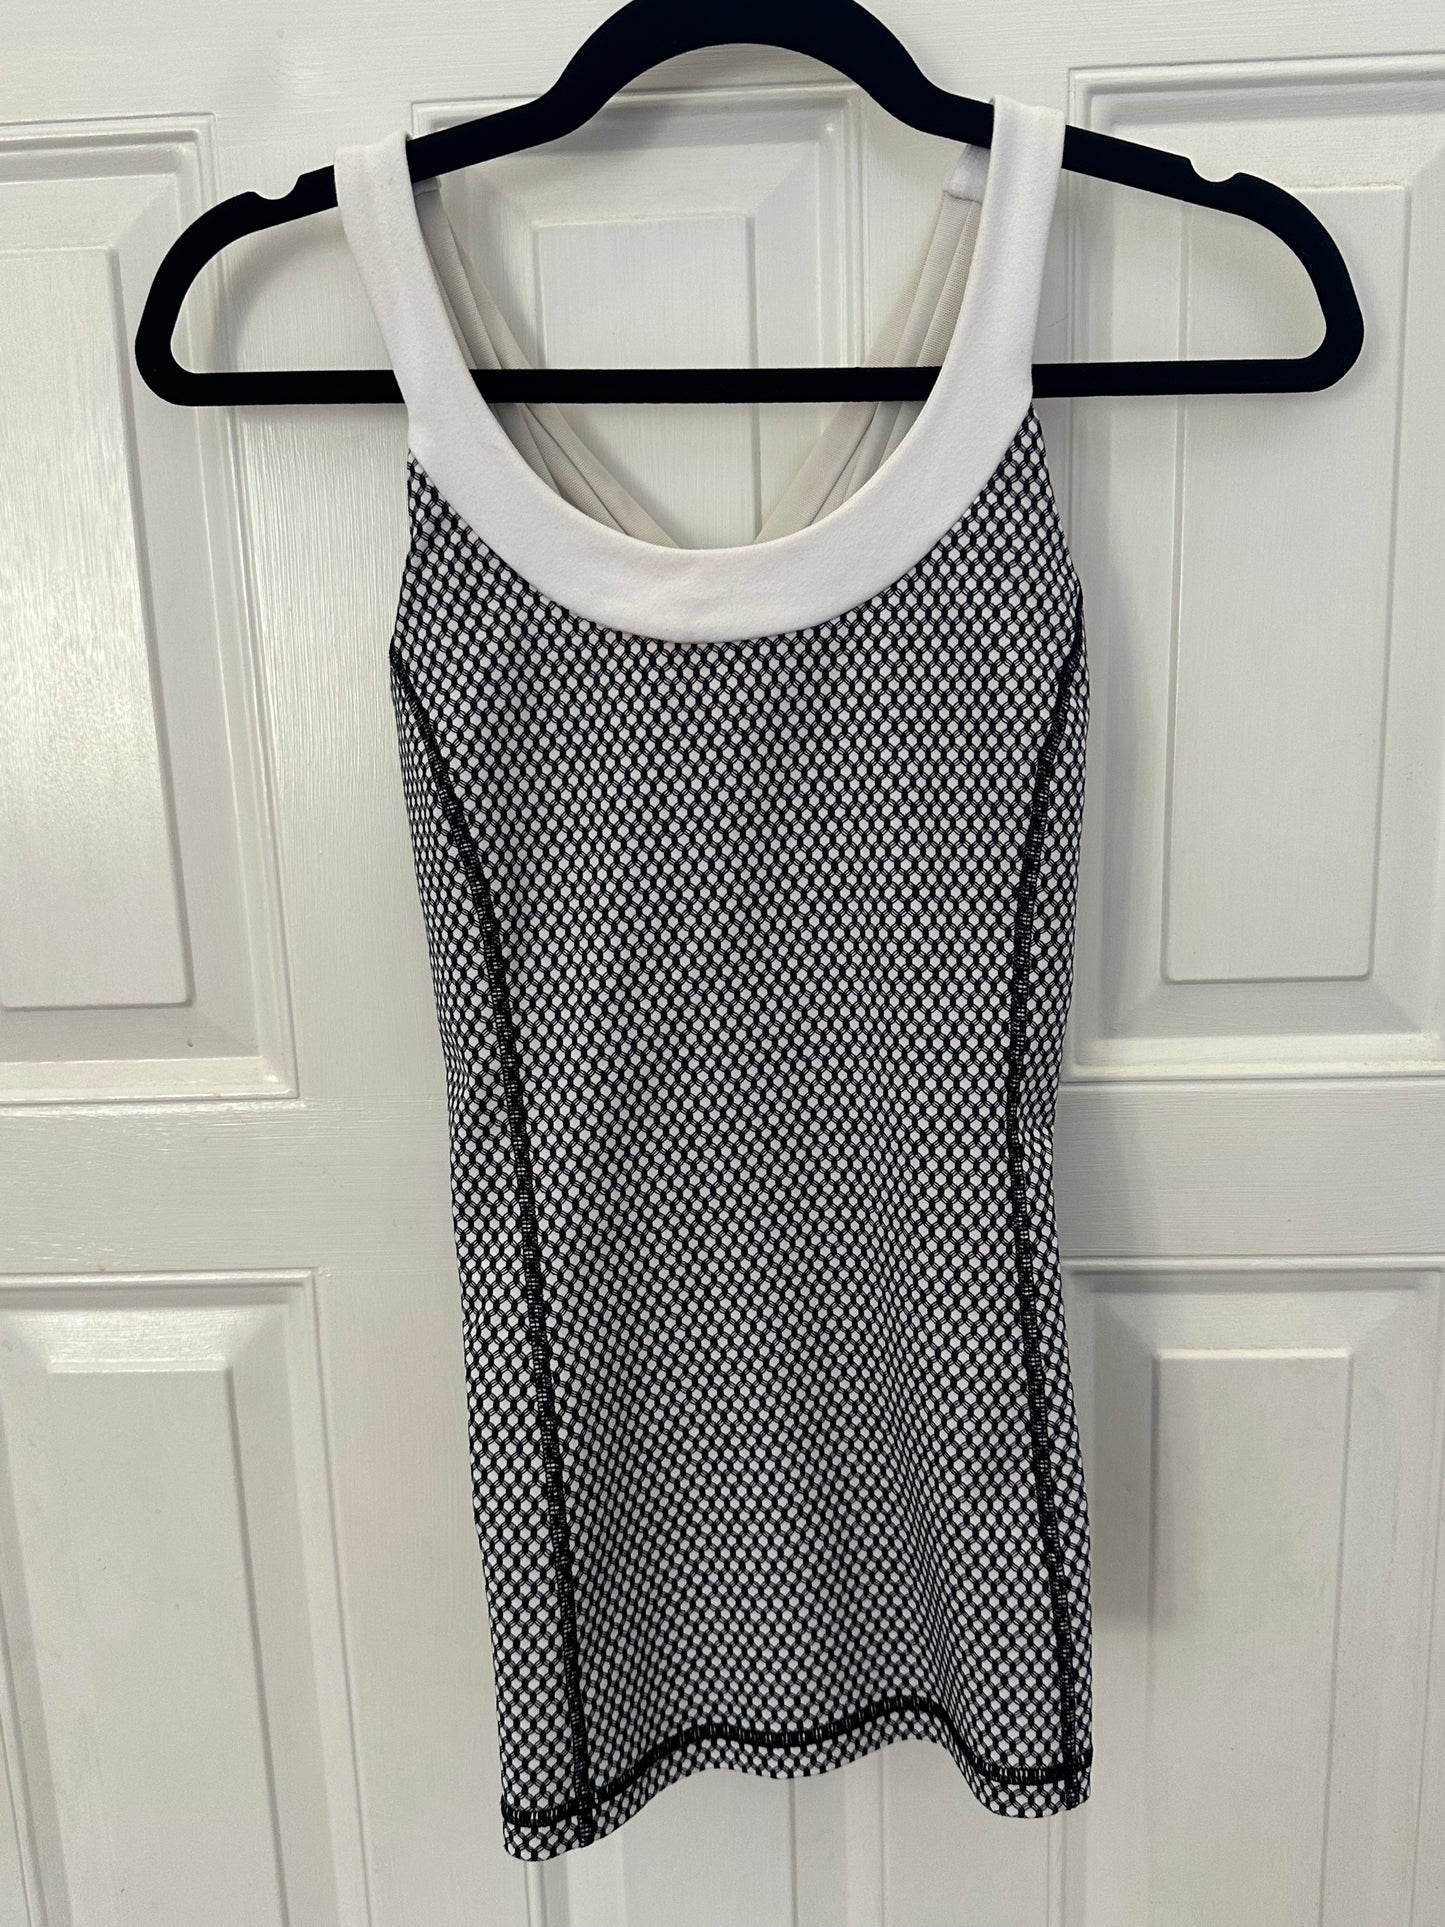 Lululemon Sz 6 Black and White Tank Pick up in Milford 45244